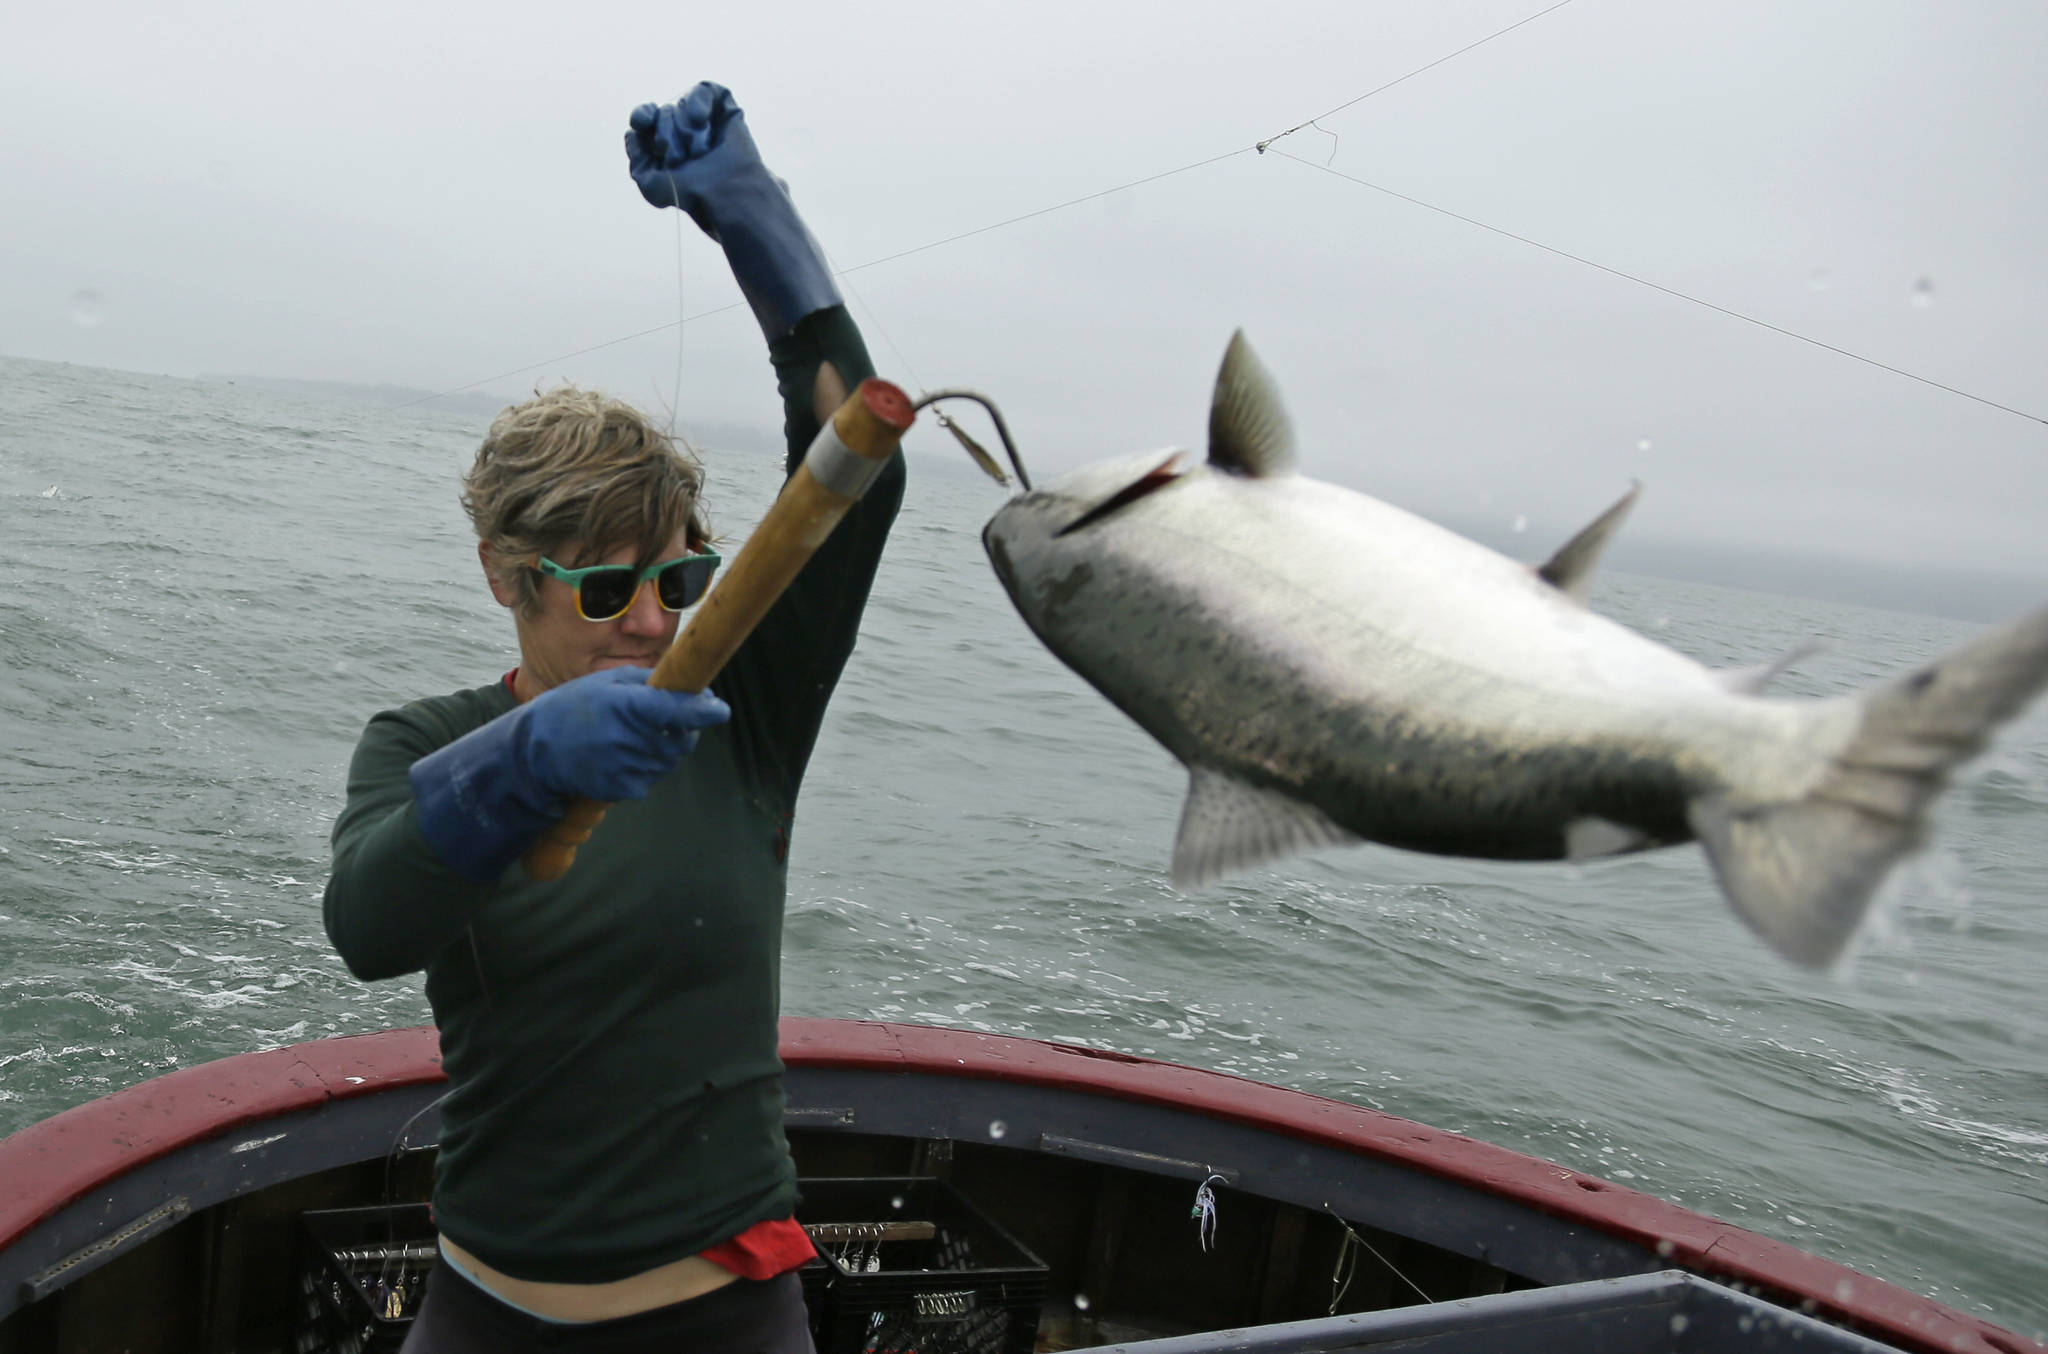 In this photo taken Wednesday, July 17, 2019, Sarah Bates hauls in a chinook salmon on the fishing boat Bounty near Bolinas, Calif. California fishermen are reporting one of the best salmon fishing seasons in more than a decade, thanks to heavy rain and snow that ended the state’s historic drought. It’s a sharp reversal for chinook salmon, also known as king salmon, an iconic fish that helps sustain many Pacific Coast fishing communities. (AP Photo/Eric Risberg)